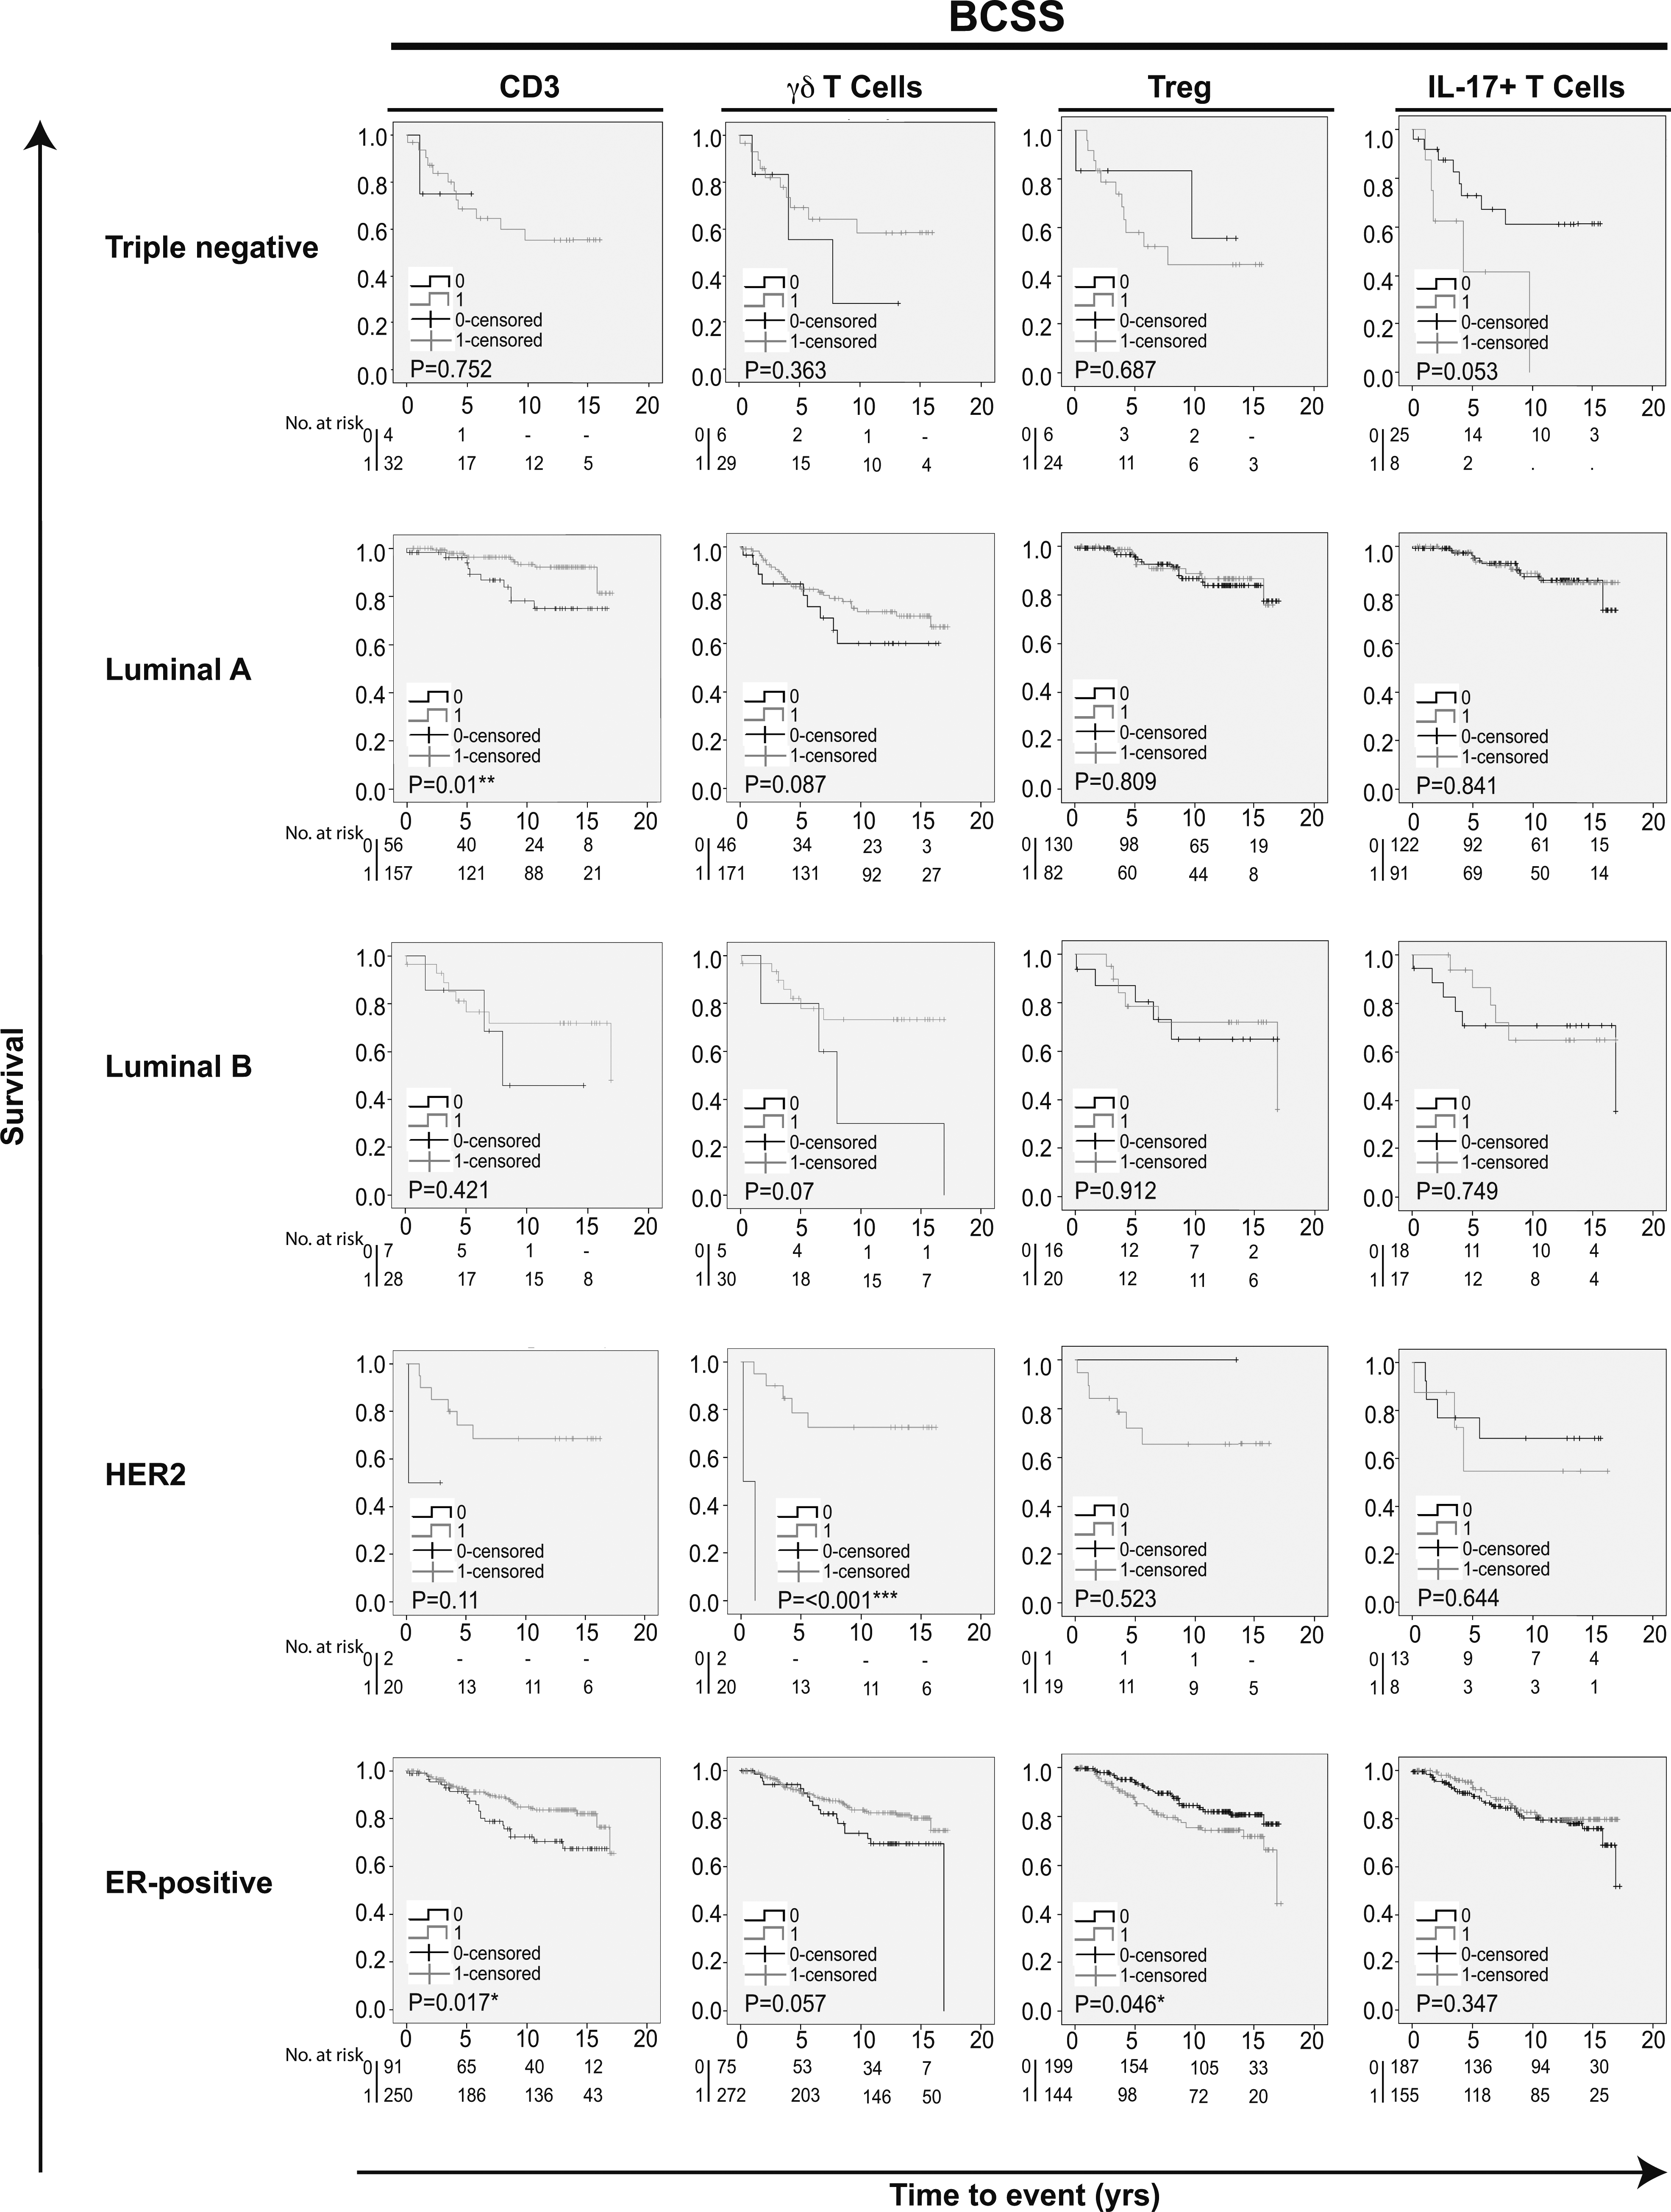 Kaplan-Meier estimates of breast cancer specific survival according to different infiltrating T cell subpopulations in breast cancer. Impact of pan-T cell CD3, γ⁢δ T cells, Tregs and IL-17+ T cells on BCSS in different breast cancer subtypes. Log-rank P value < 0.05 was considered significant.